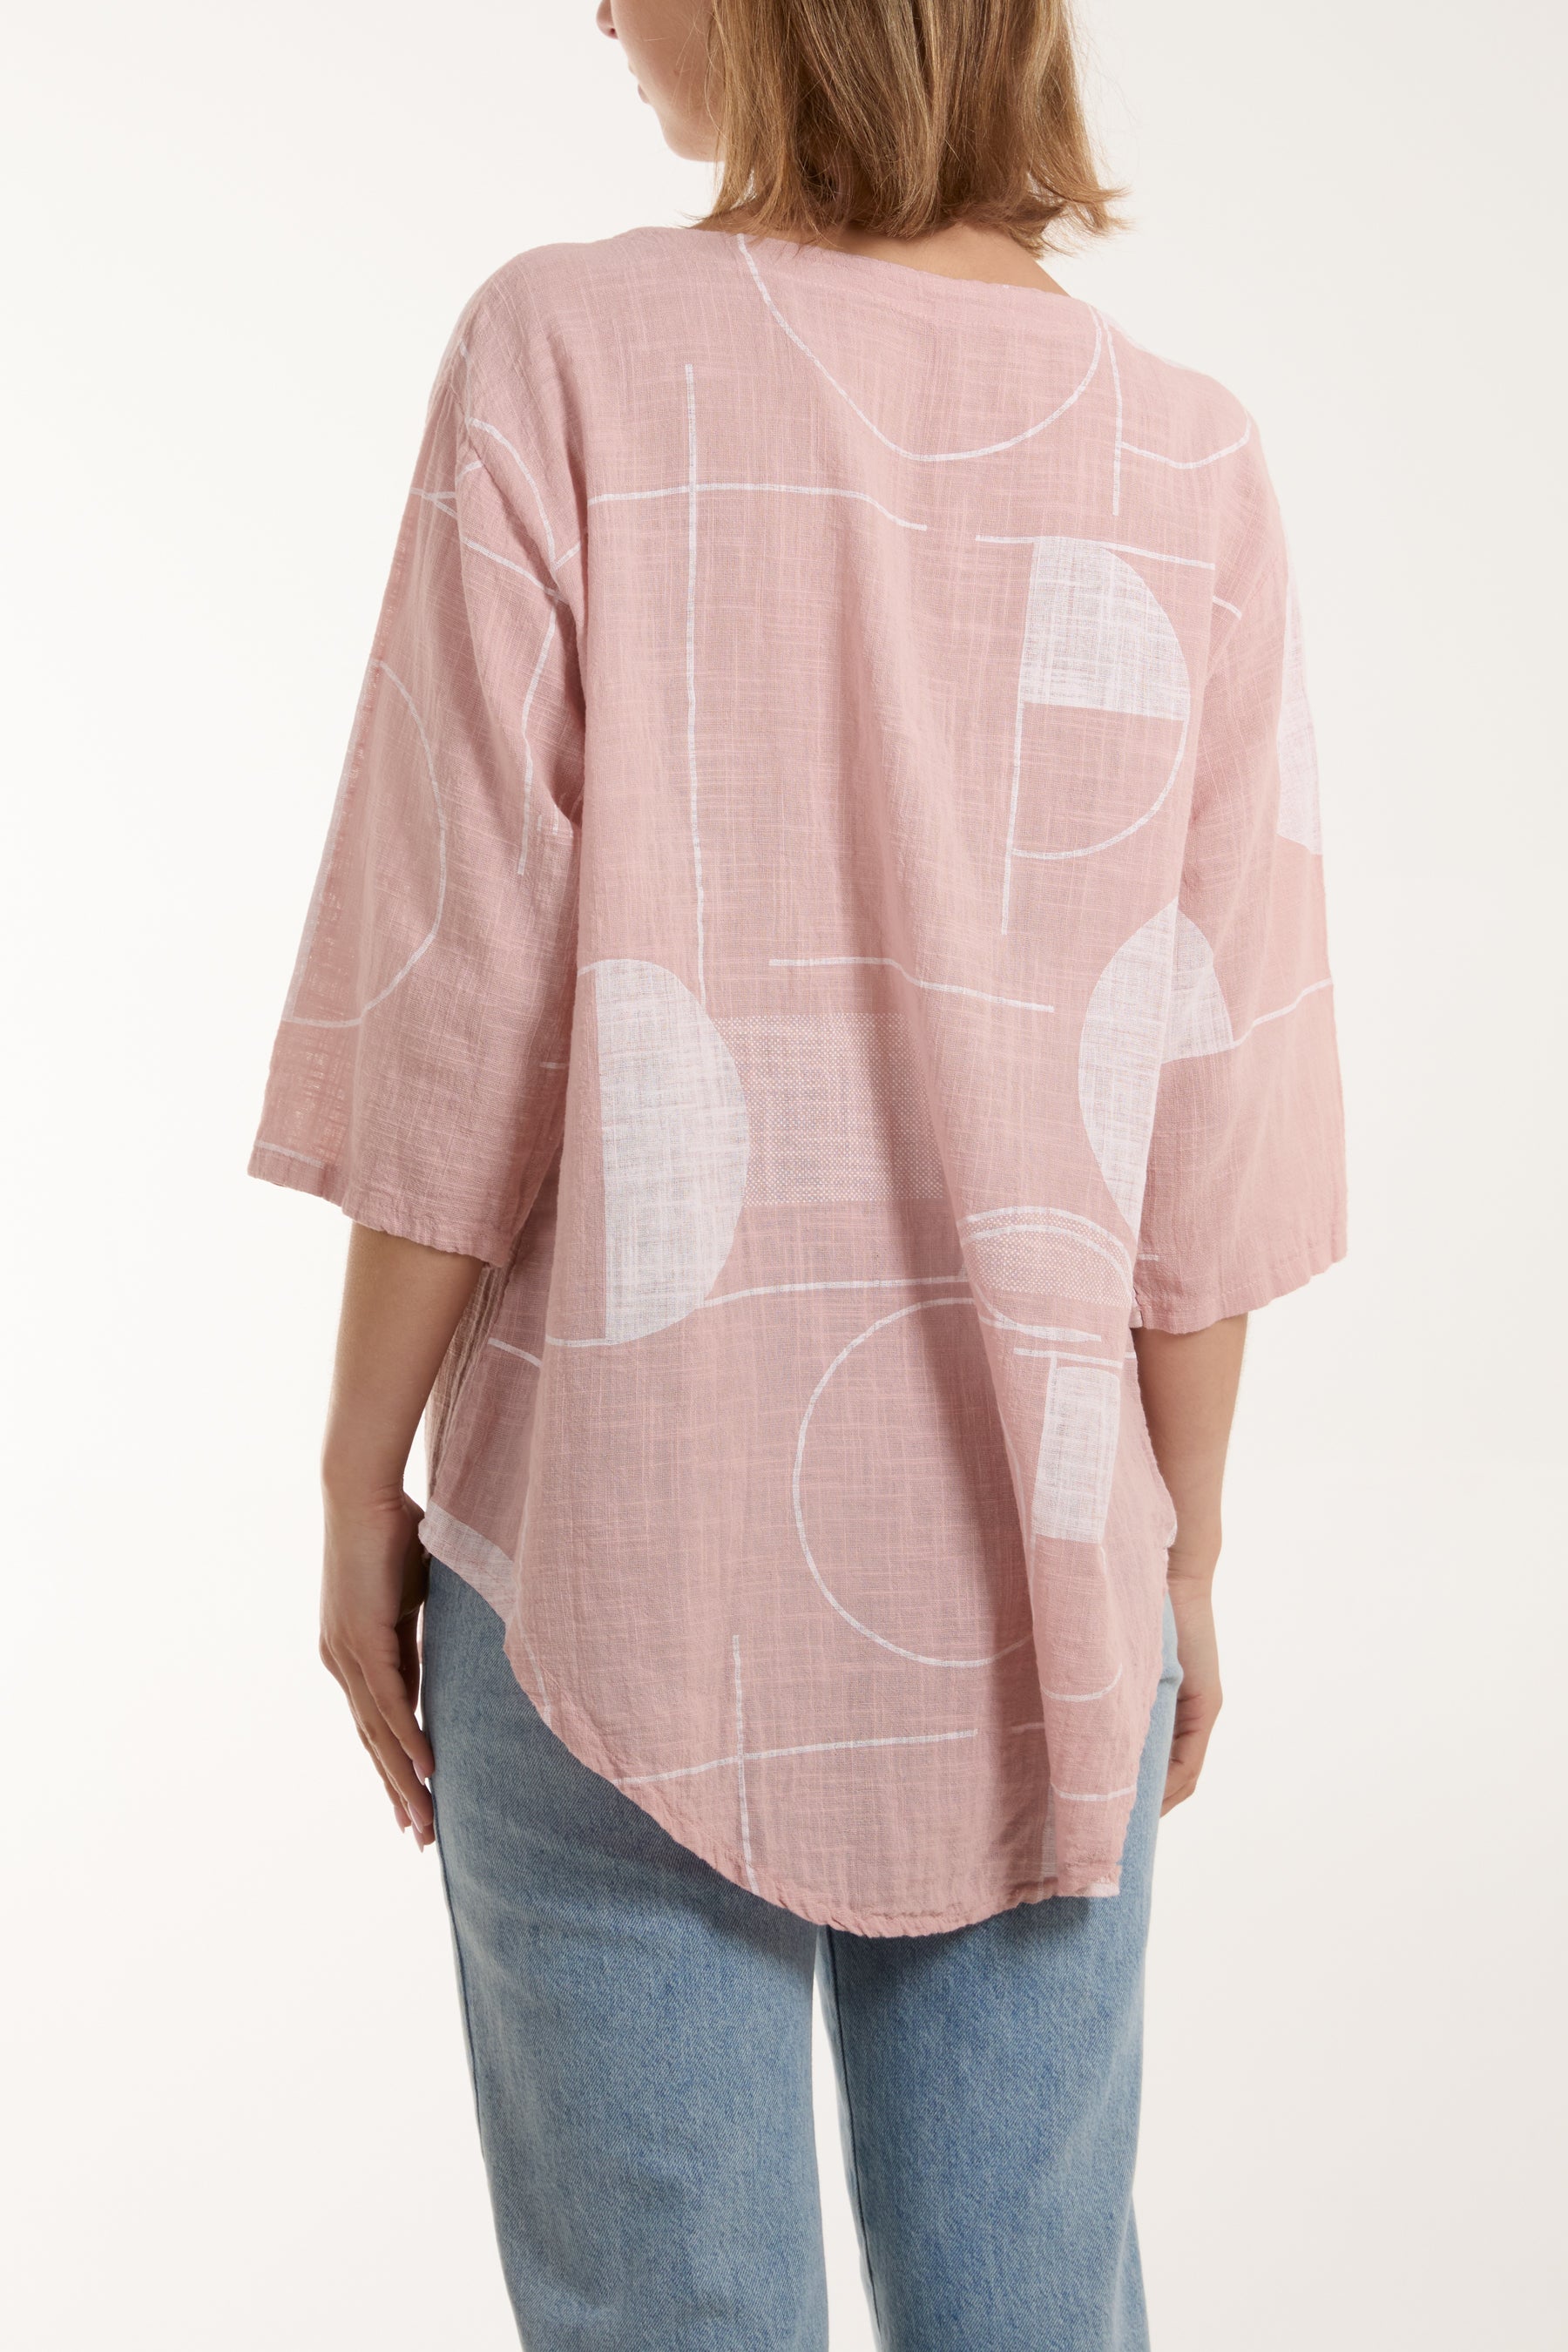 Geometric Shapes Silver Button Top